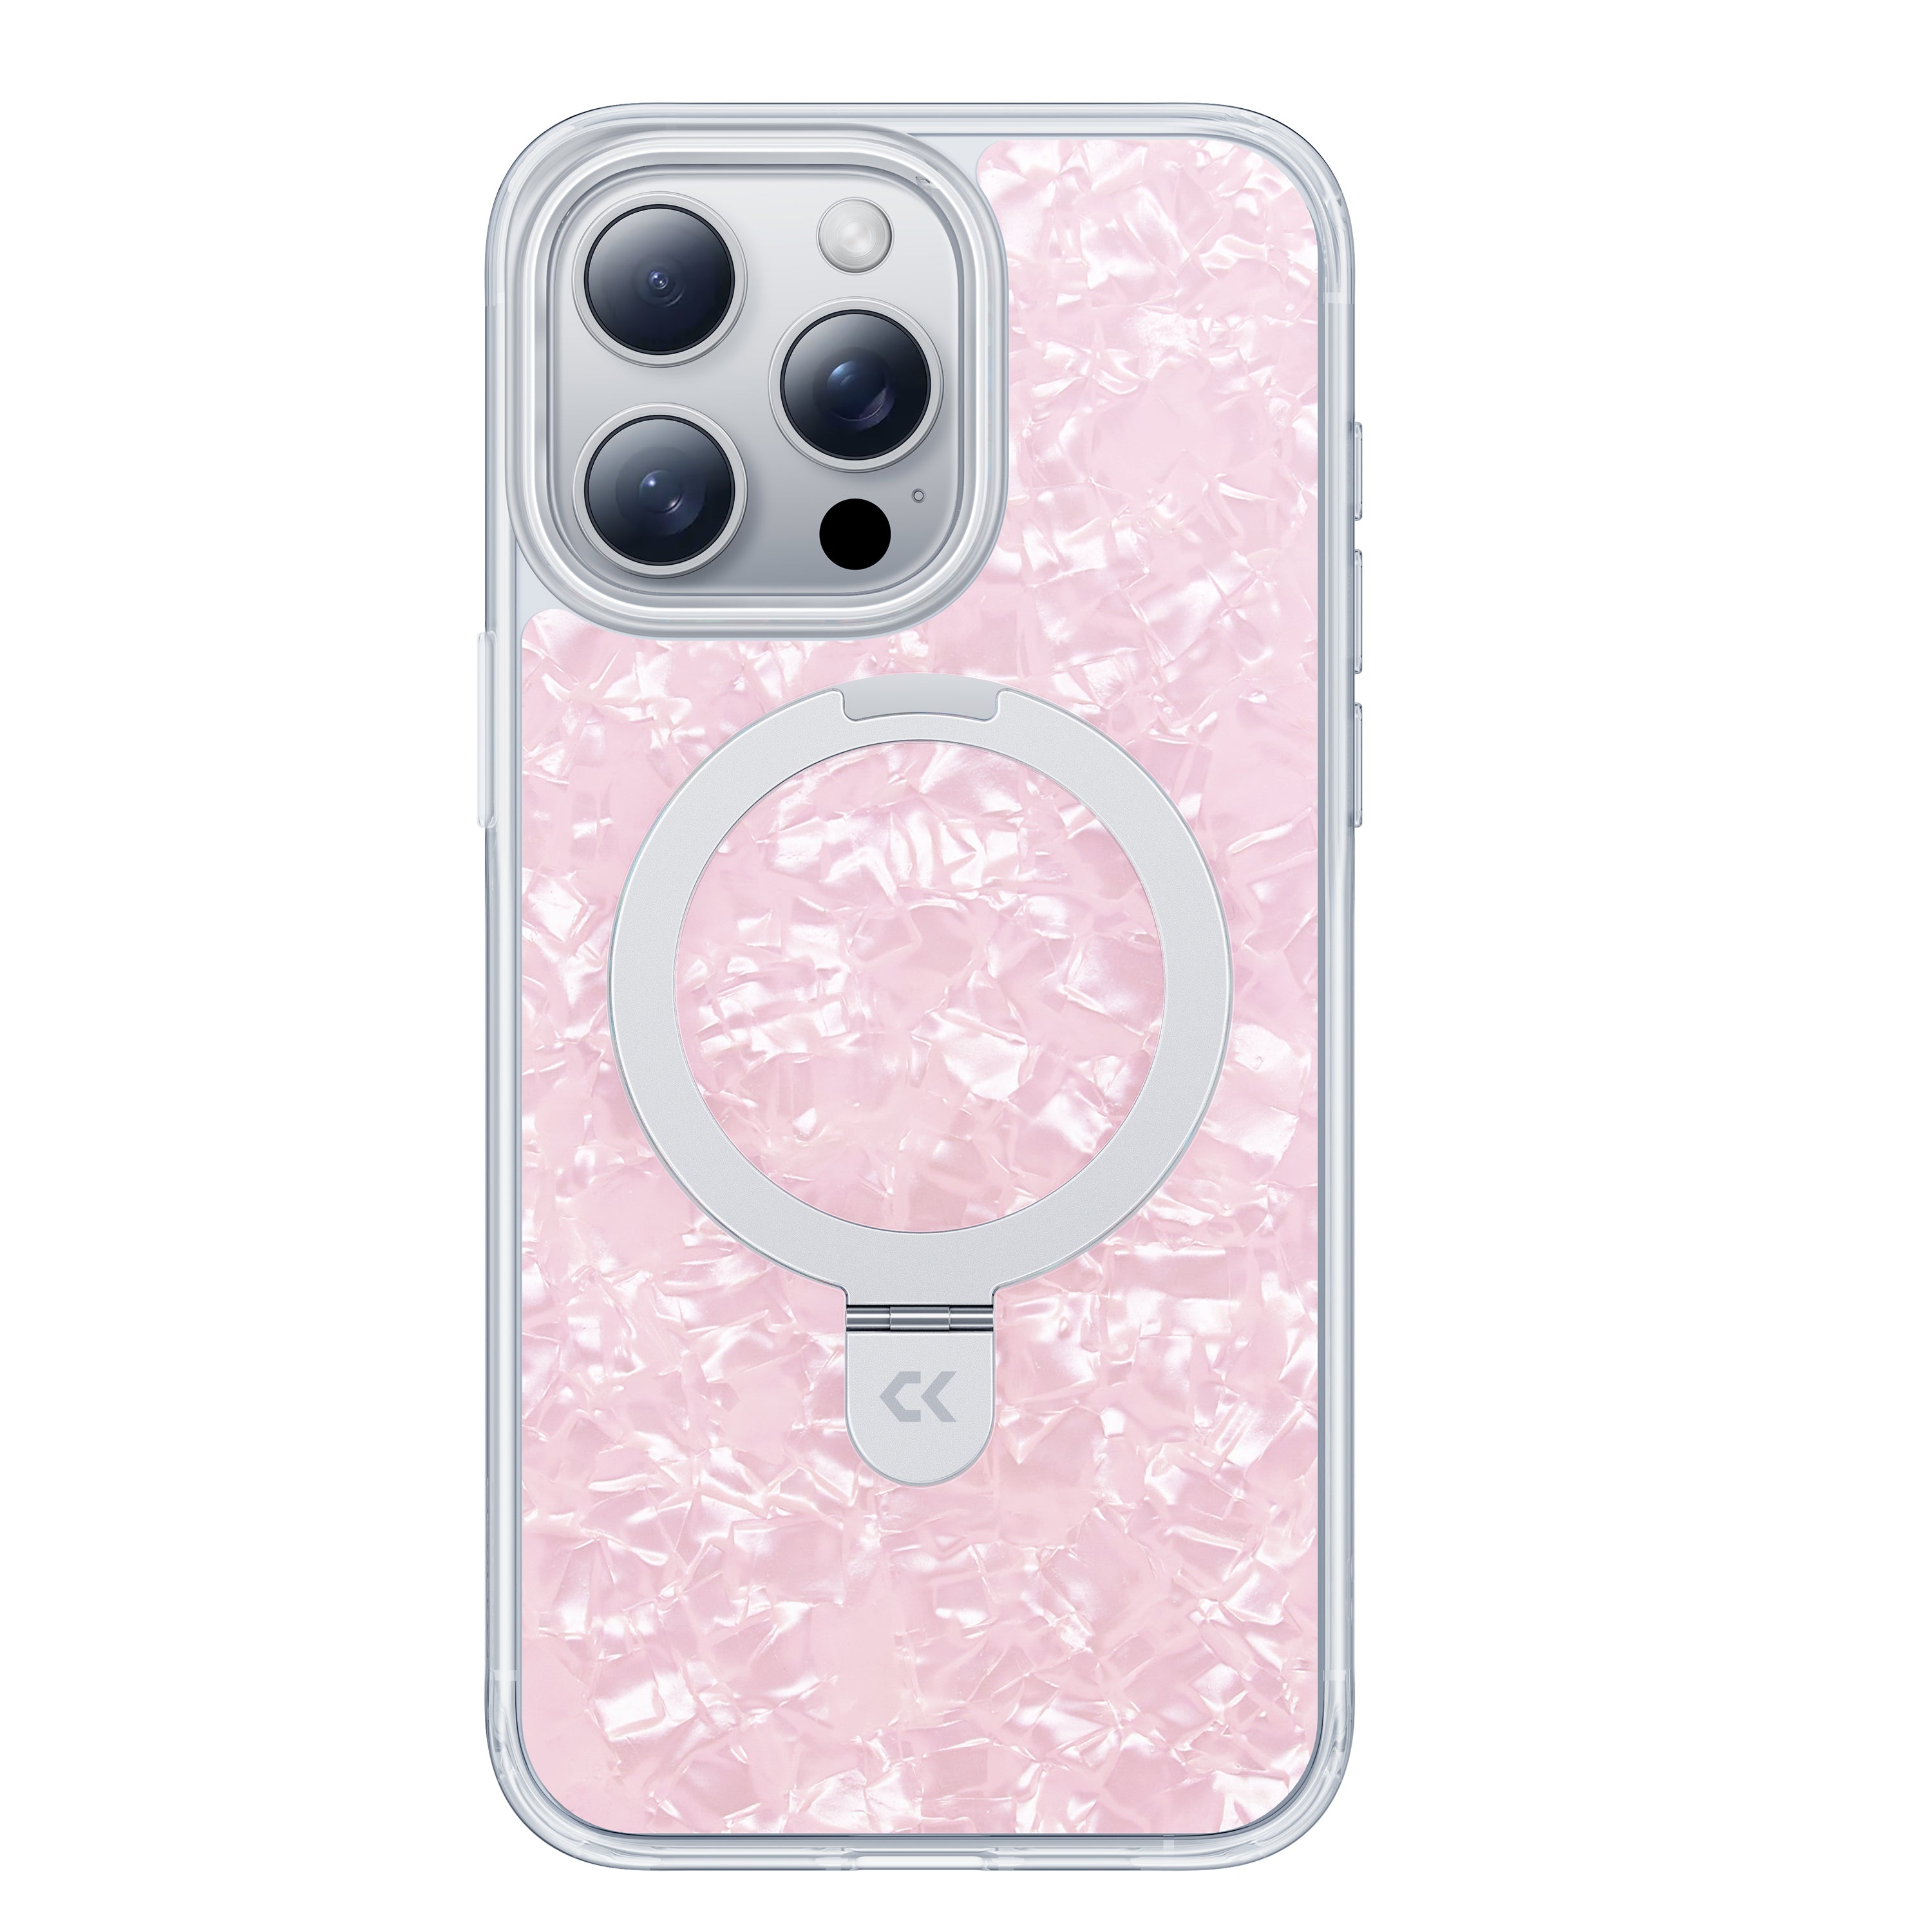 CASEKOO Clear Lock Pearl Series Magic Stand Version Cases For iPhone